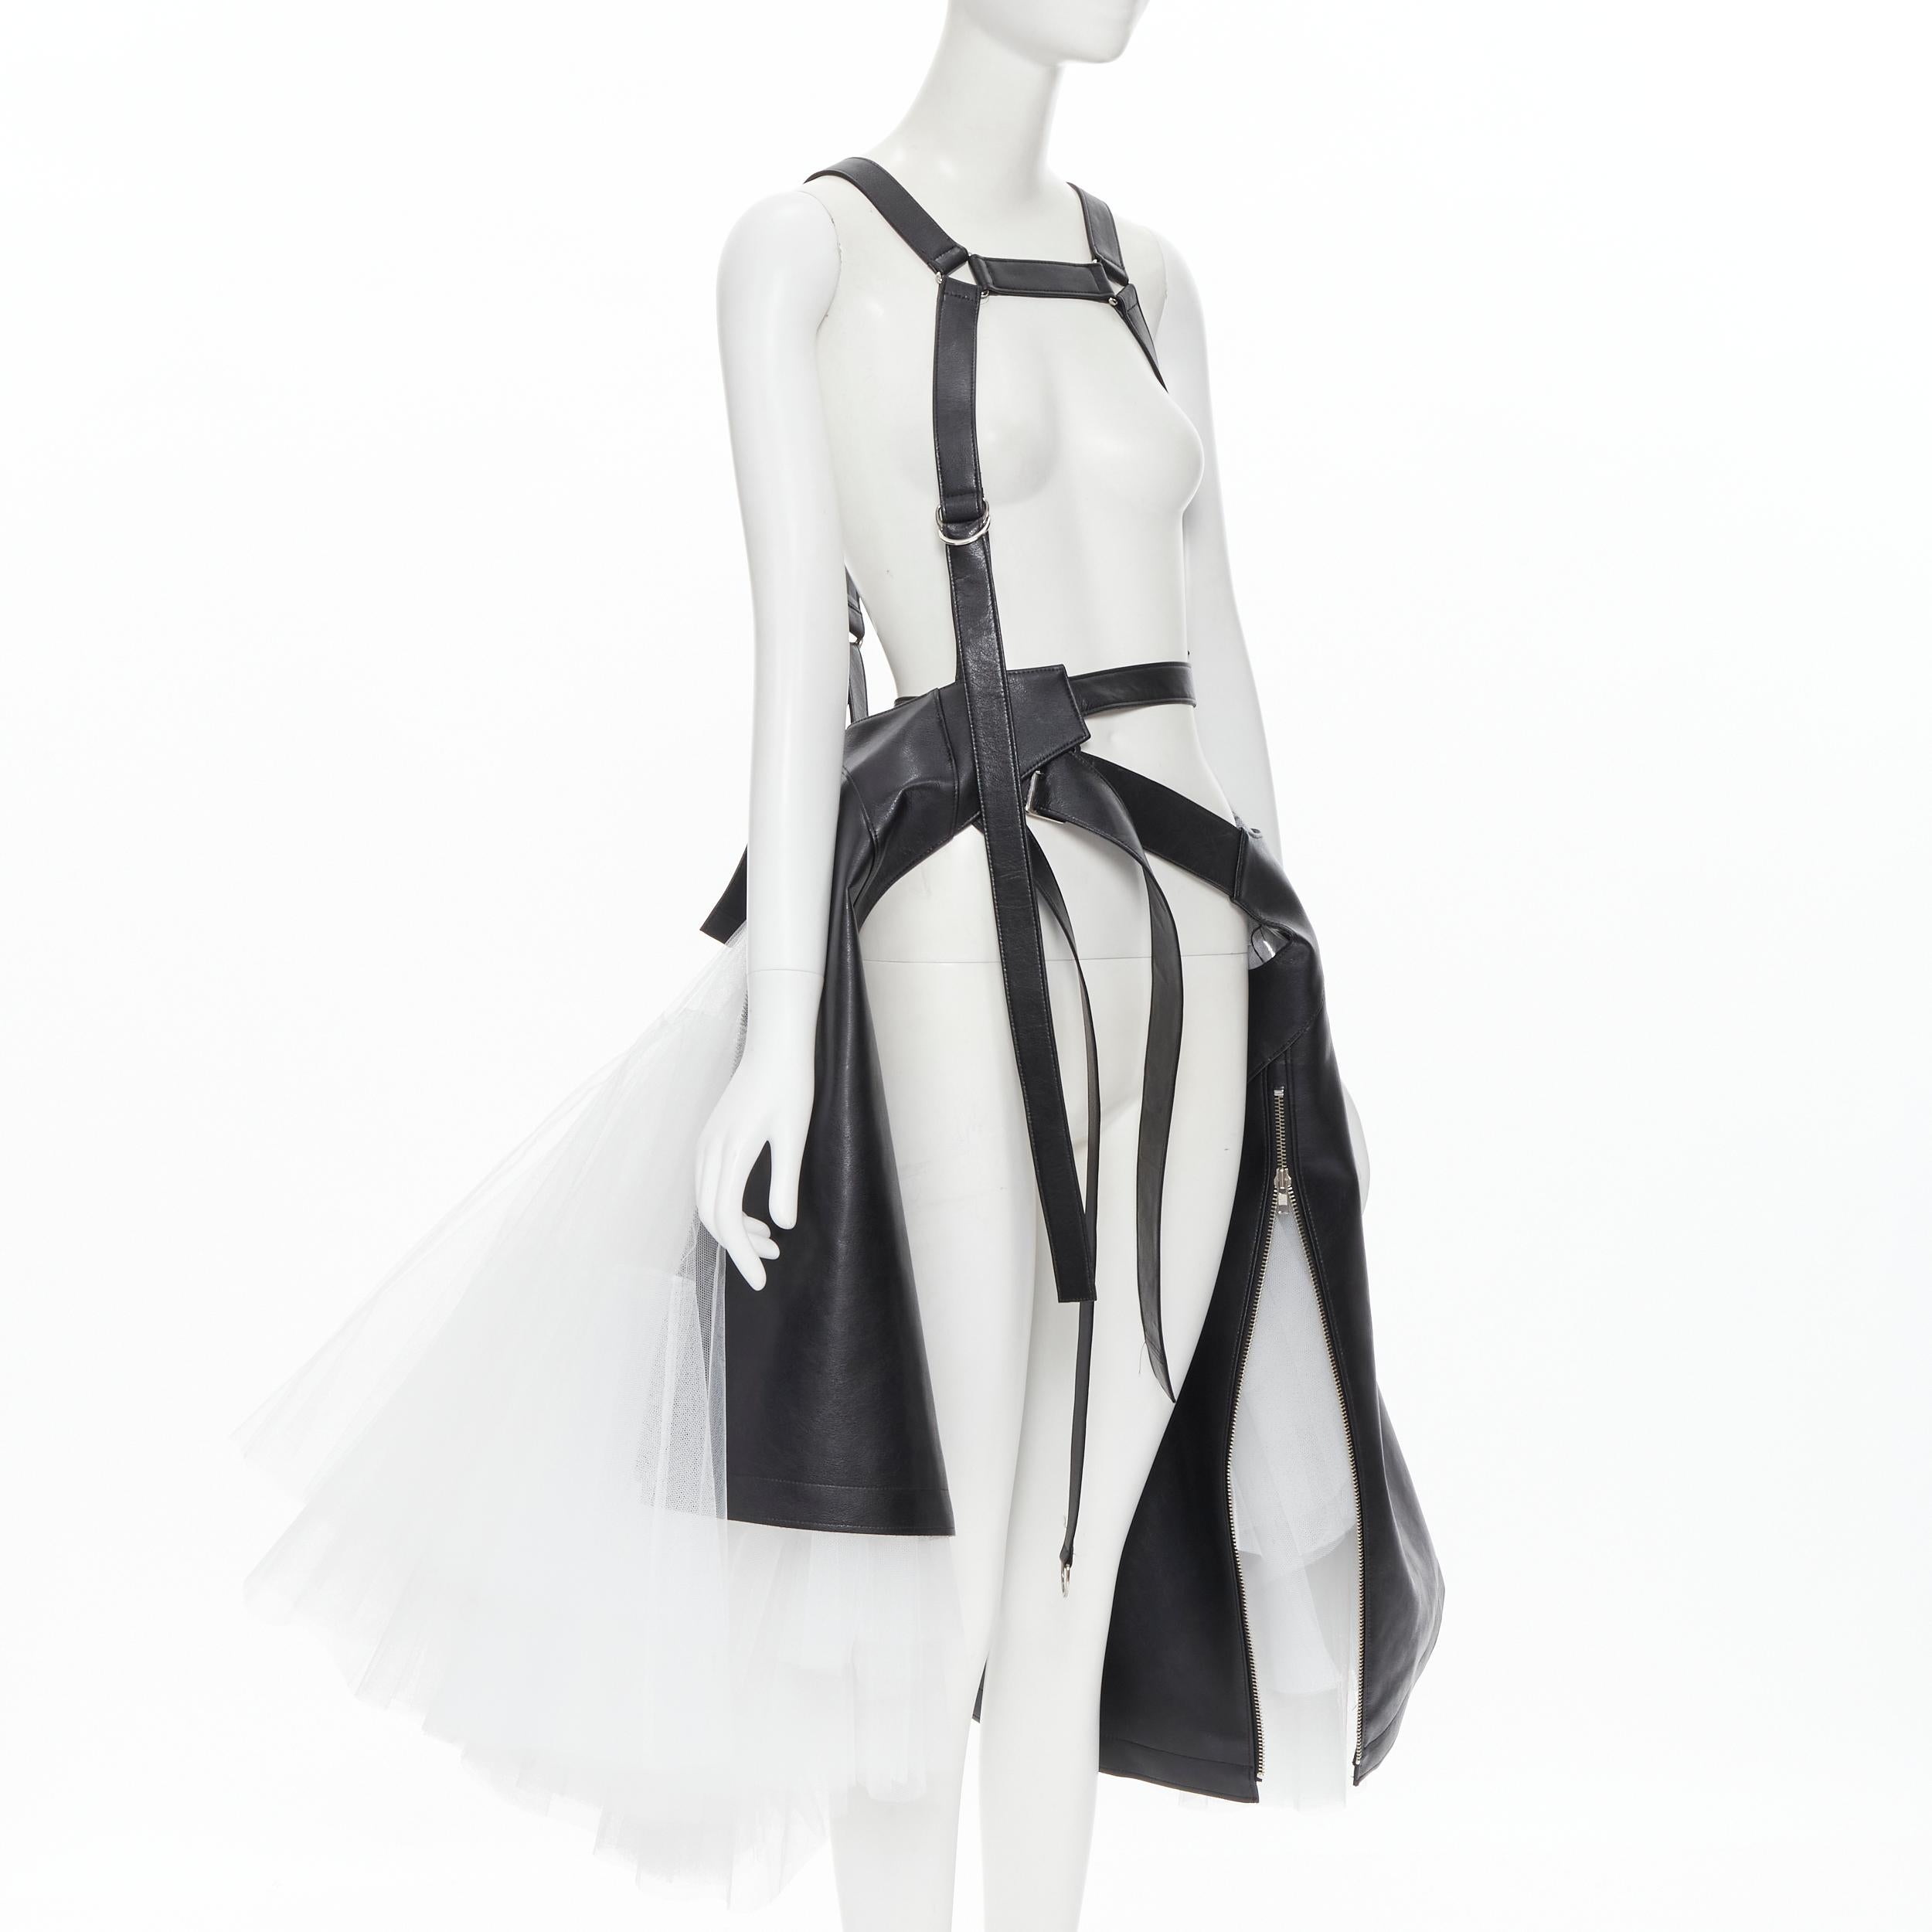 new JUNYA WATANABE Runway black leather white tulle biker harness skirt XS rare Reference: TGAS/B01346 
Brand: Junya Watanabe 
Designer: Junya Watanabe 
Collection: 2020 Runway M
Material: Faux leather 
Color: Black 
Extra Detail: Extremely rare